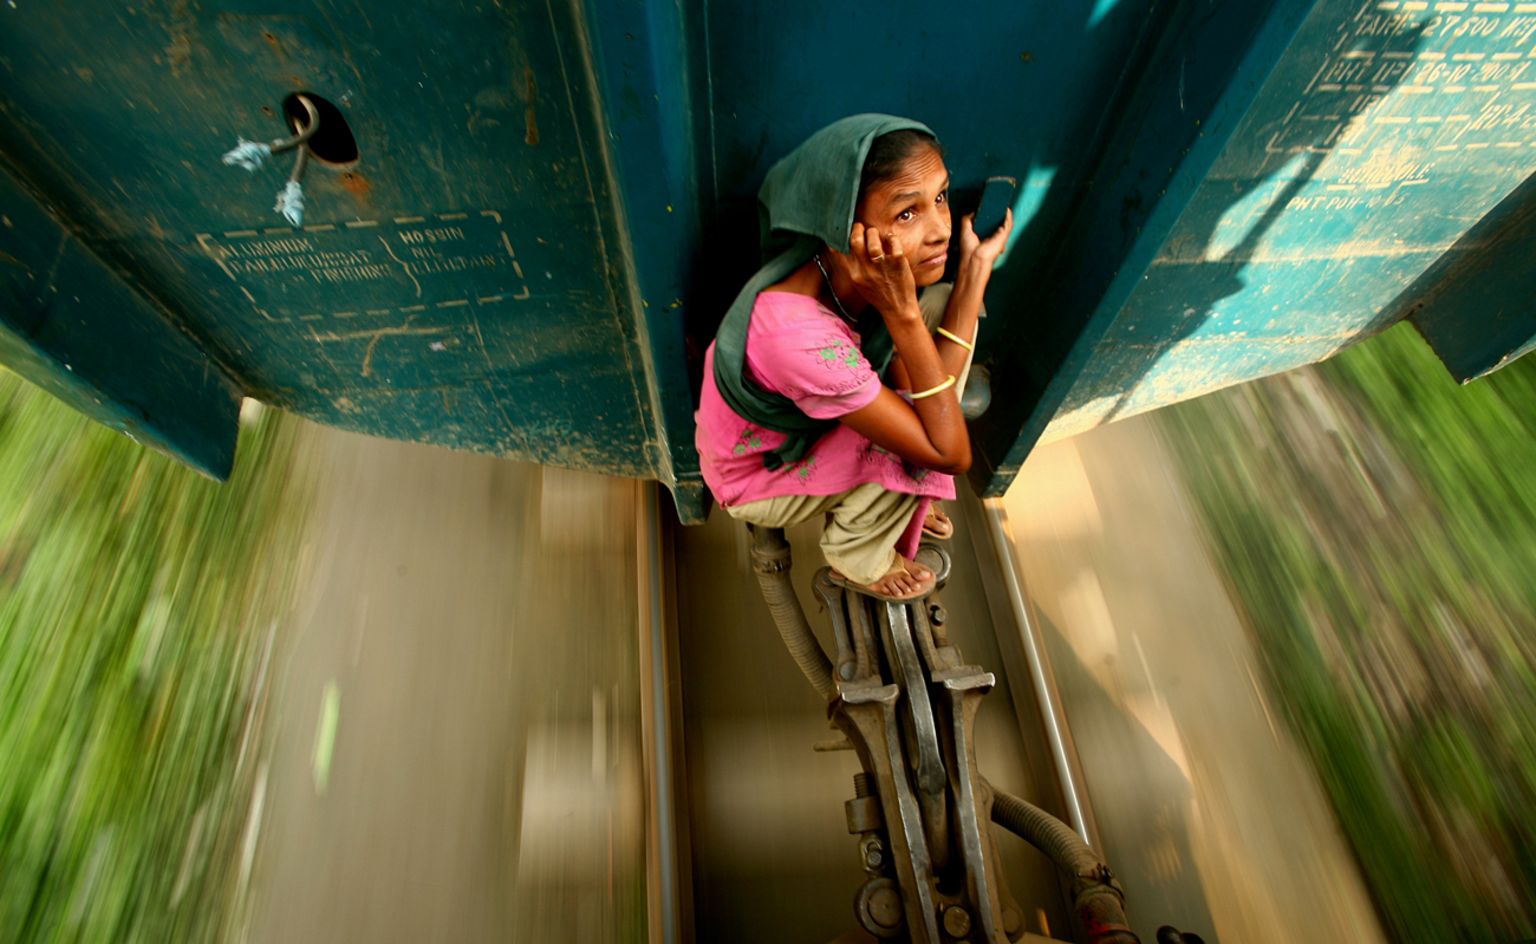 A woman travelling on the locking system of a carriage. Dhaka, Bangladesh